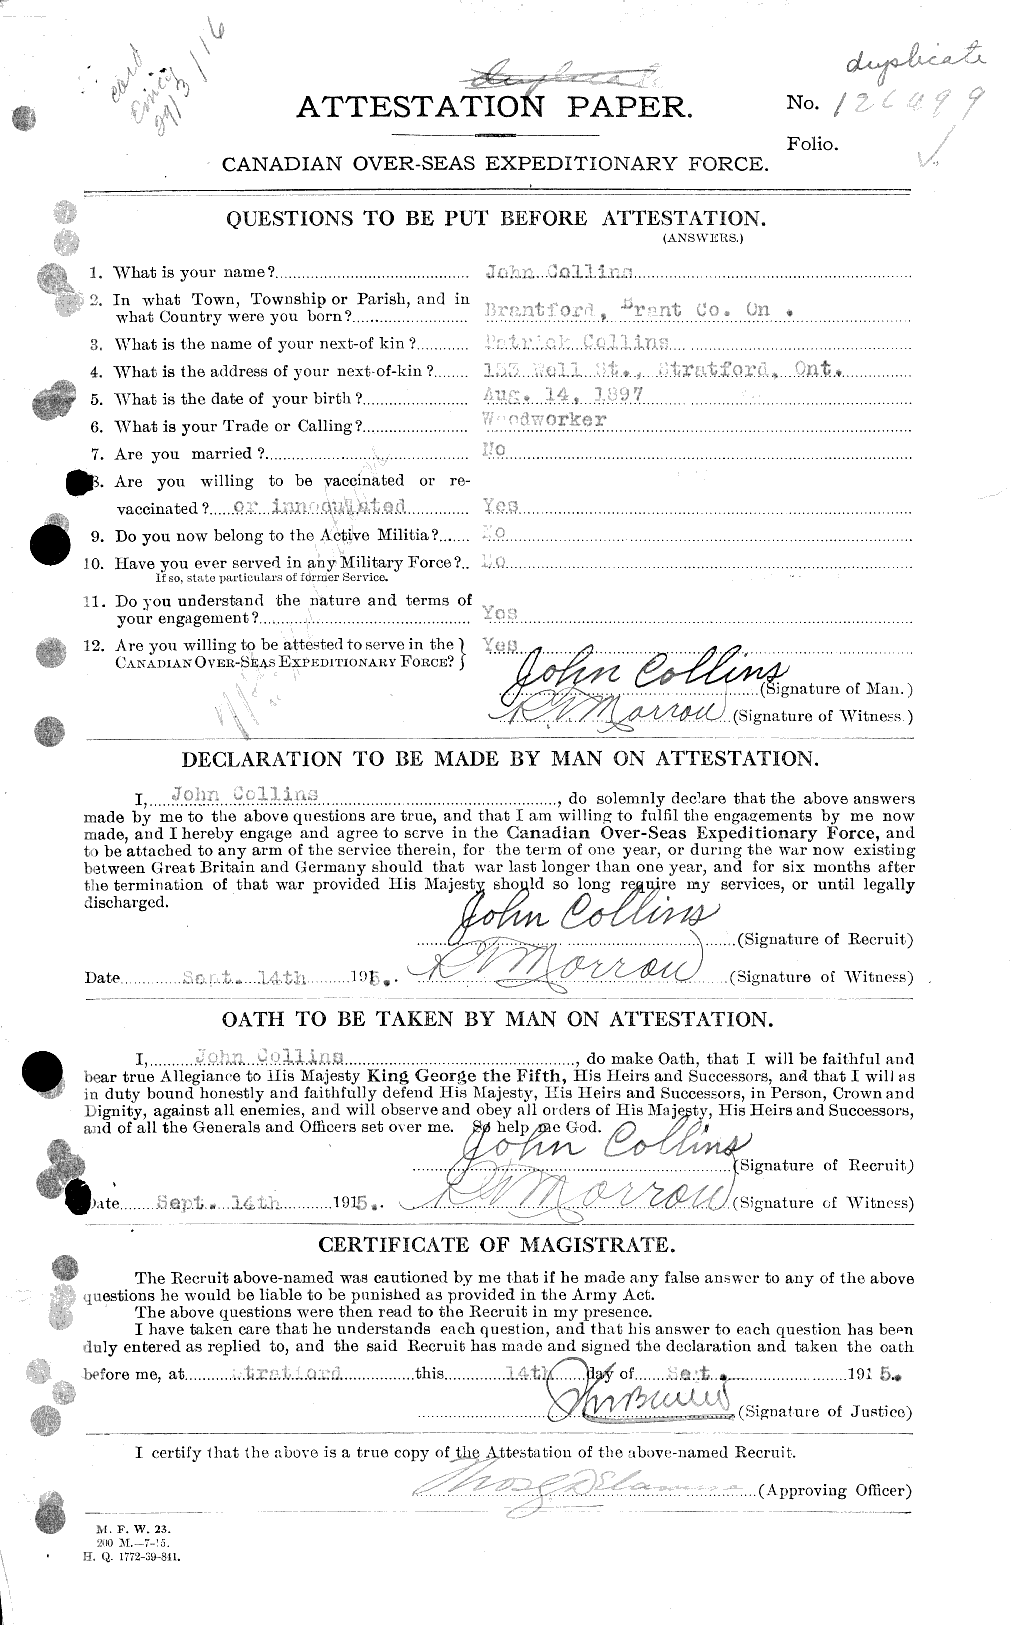 Personnel Records of the First World War - CEF 037972a